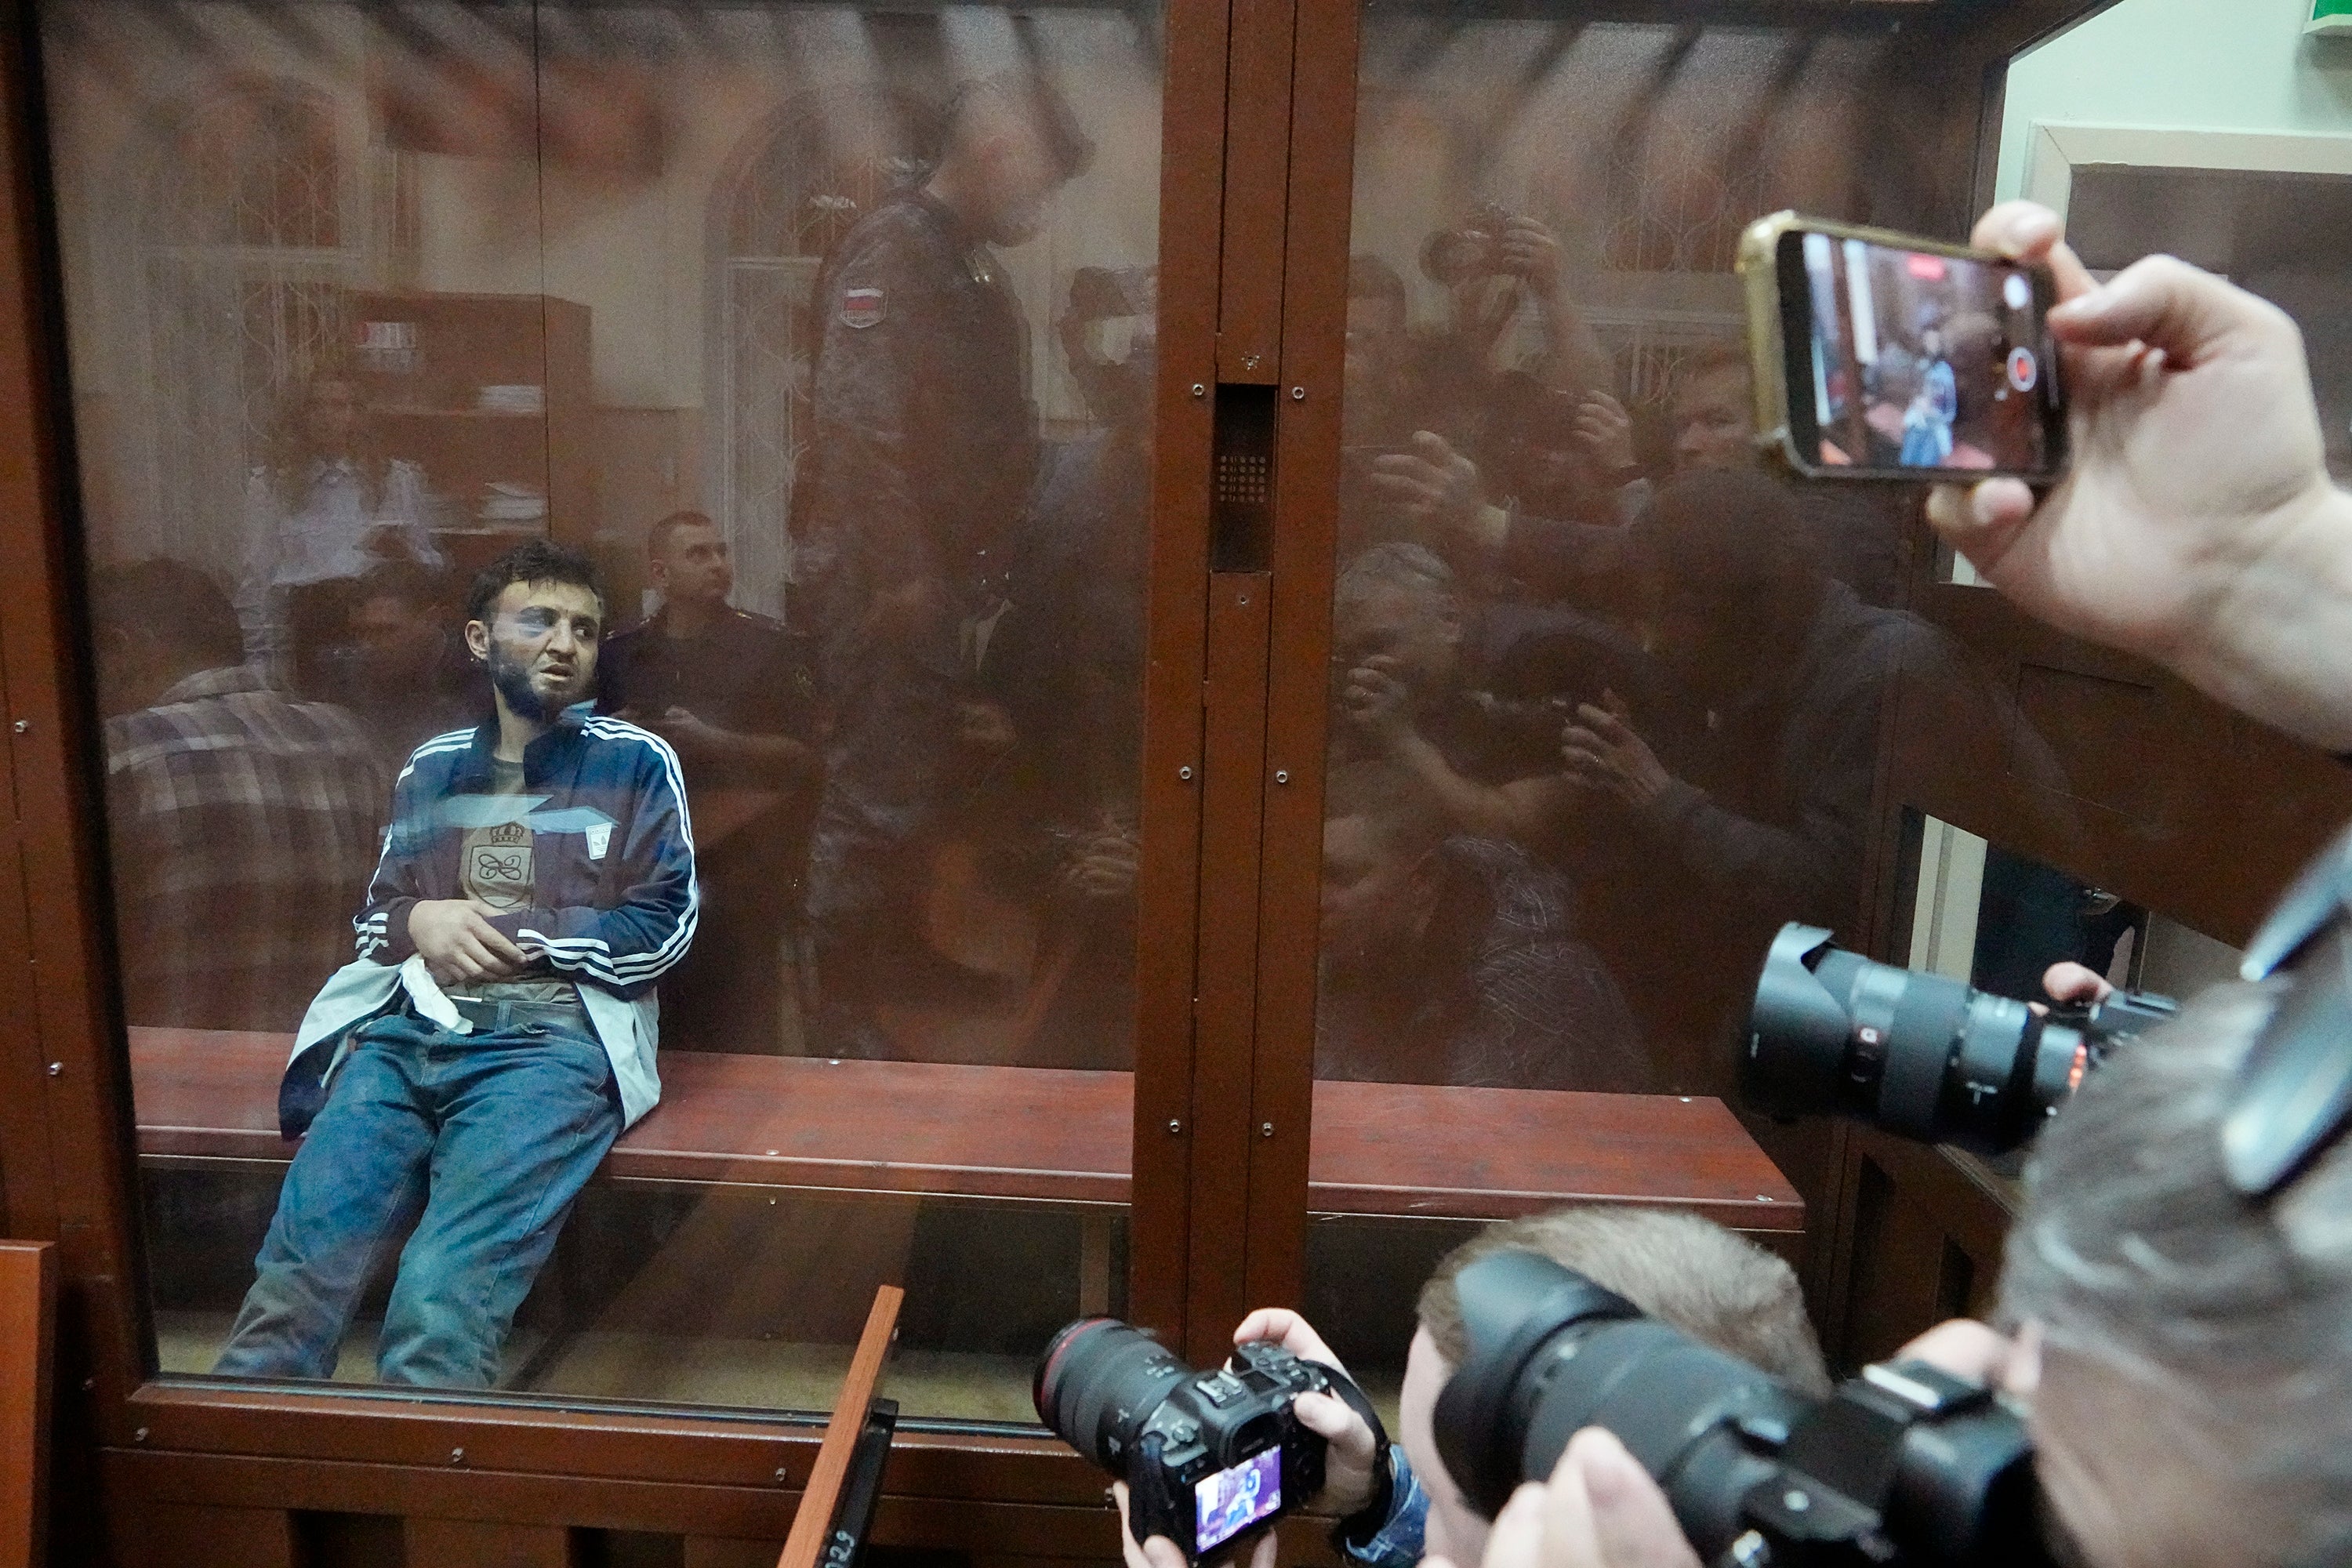 Dalerdzhon Mirzoyev, a suspect in the Crocus City Hall shooting on Friday sits in a glass cage in the Basmanny District